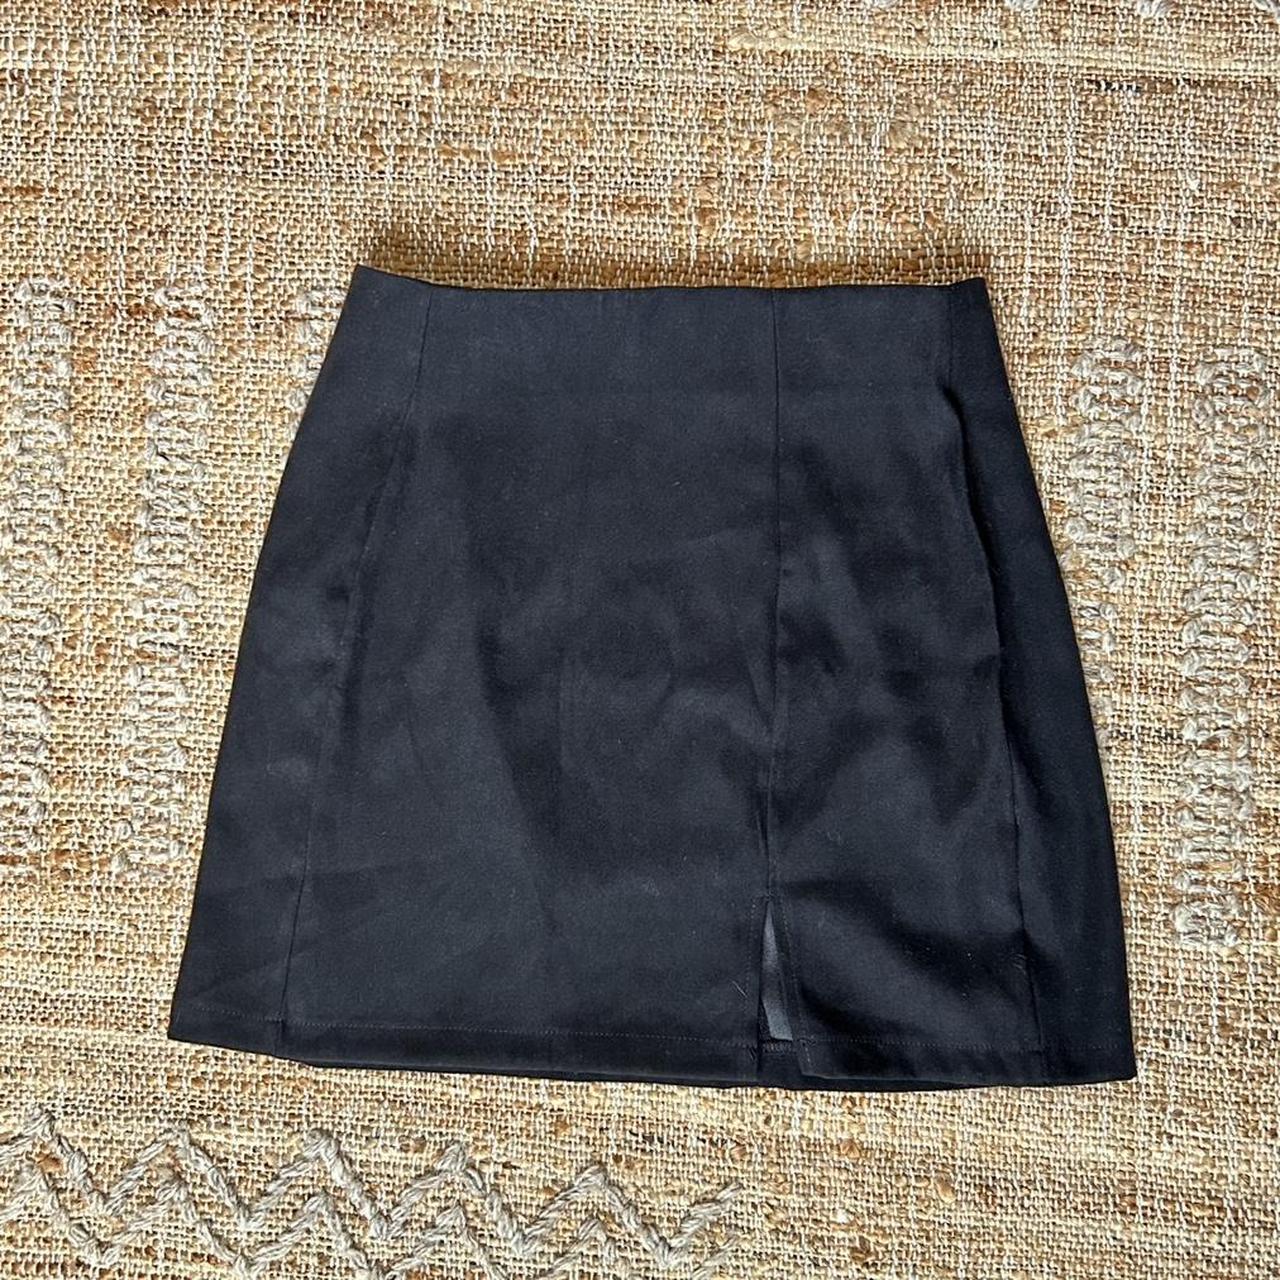 Black Suede Mini Skirt , perfect for fall and the... - Depop